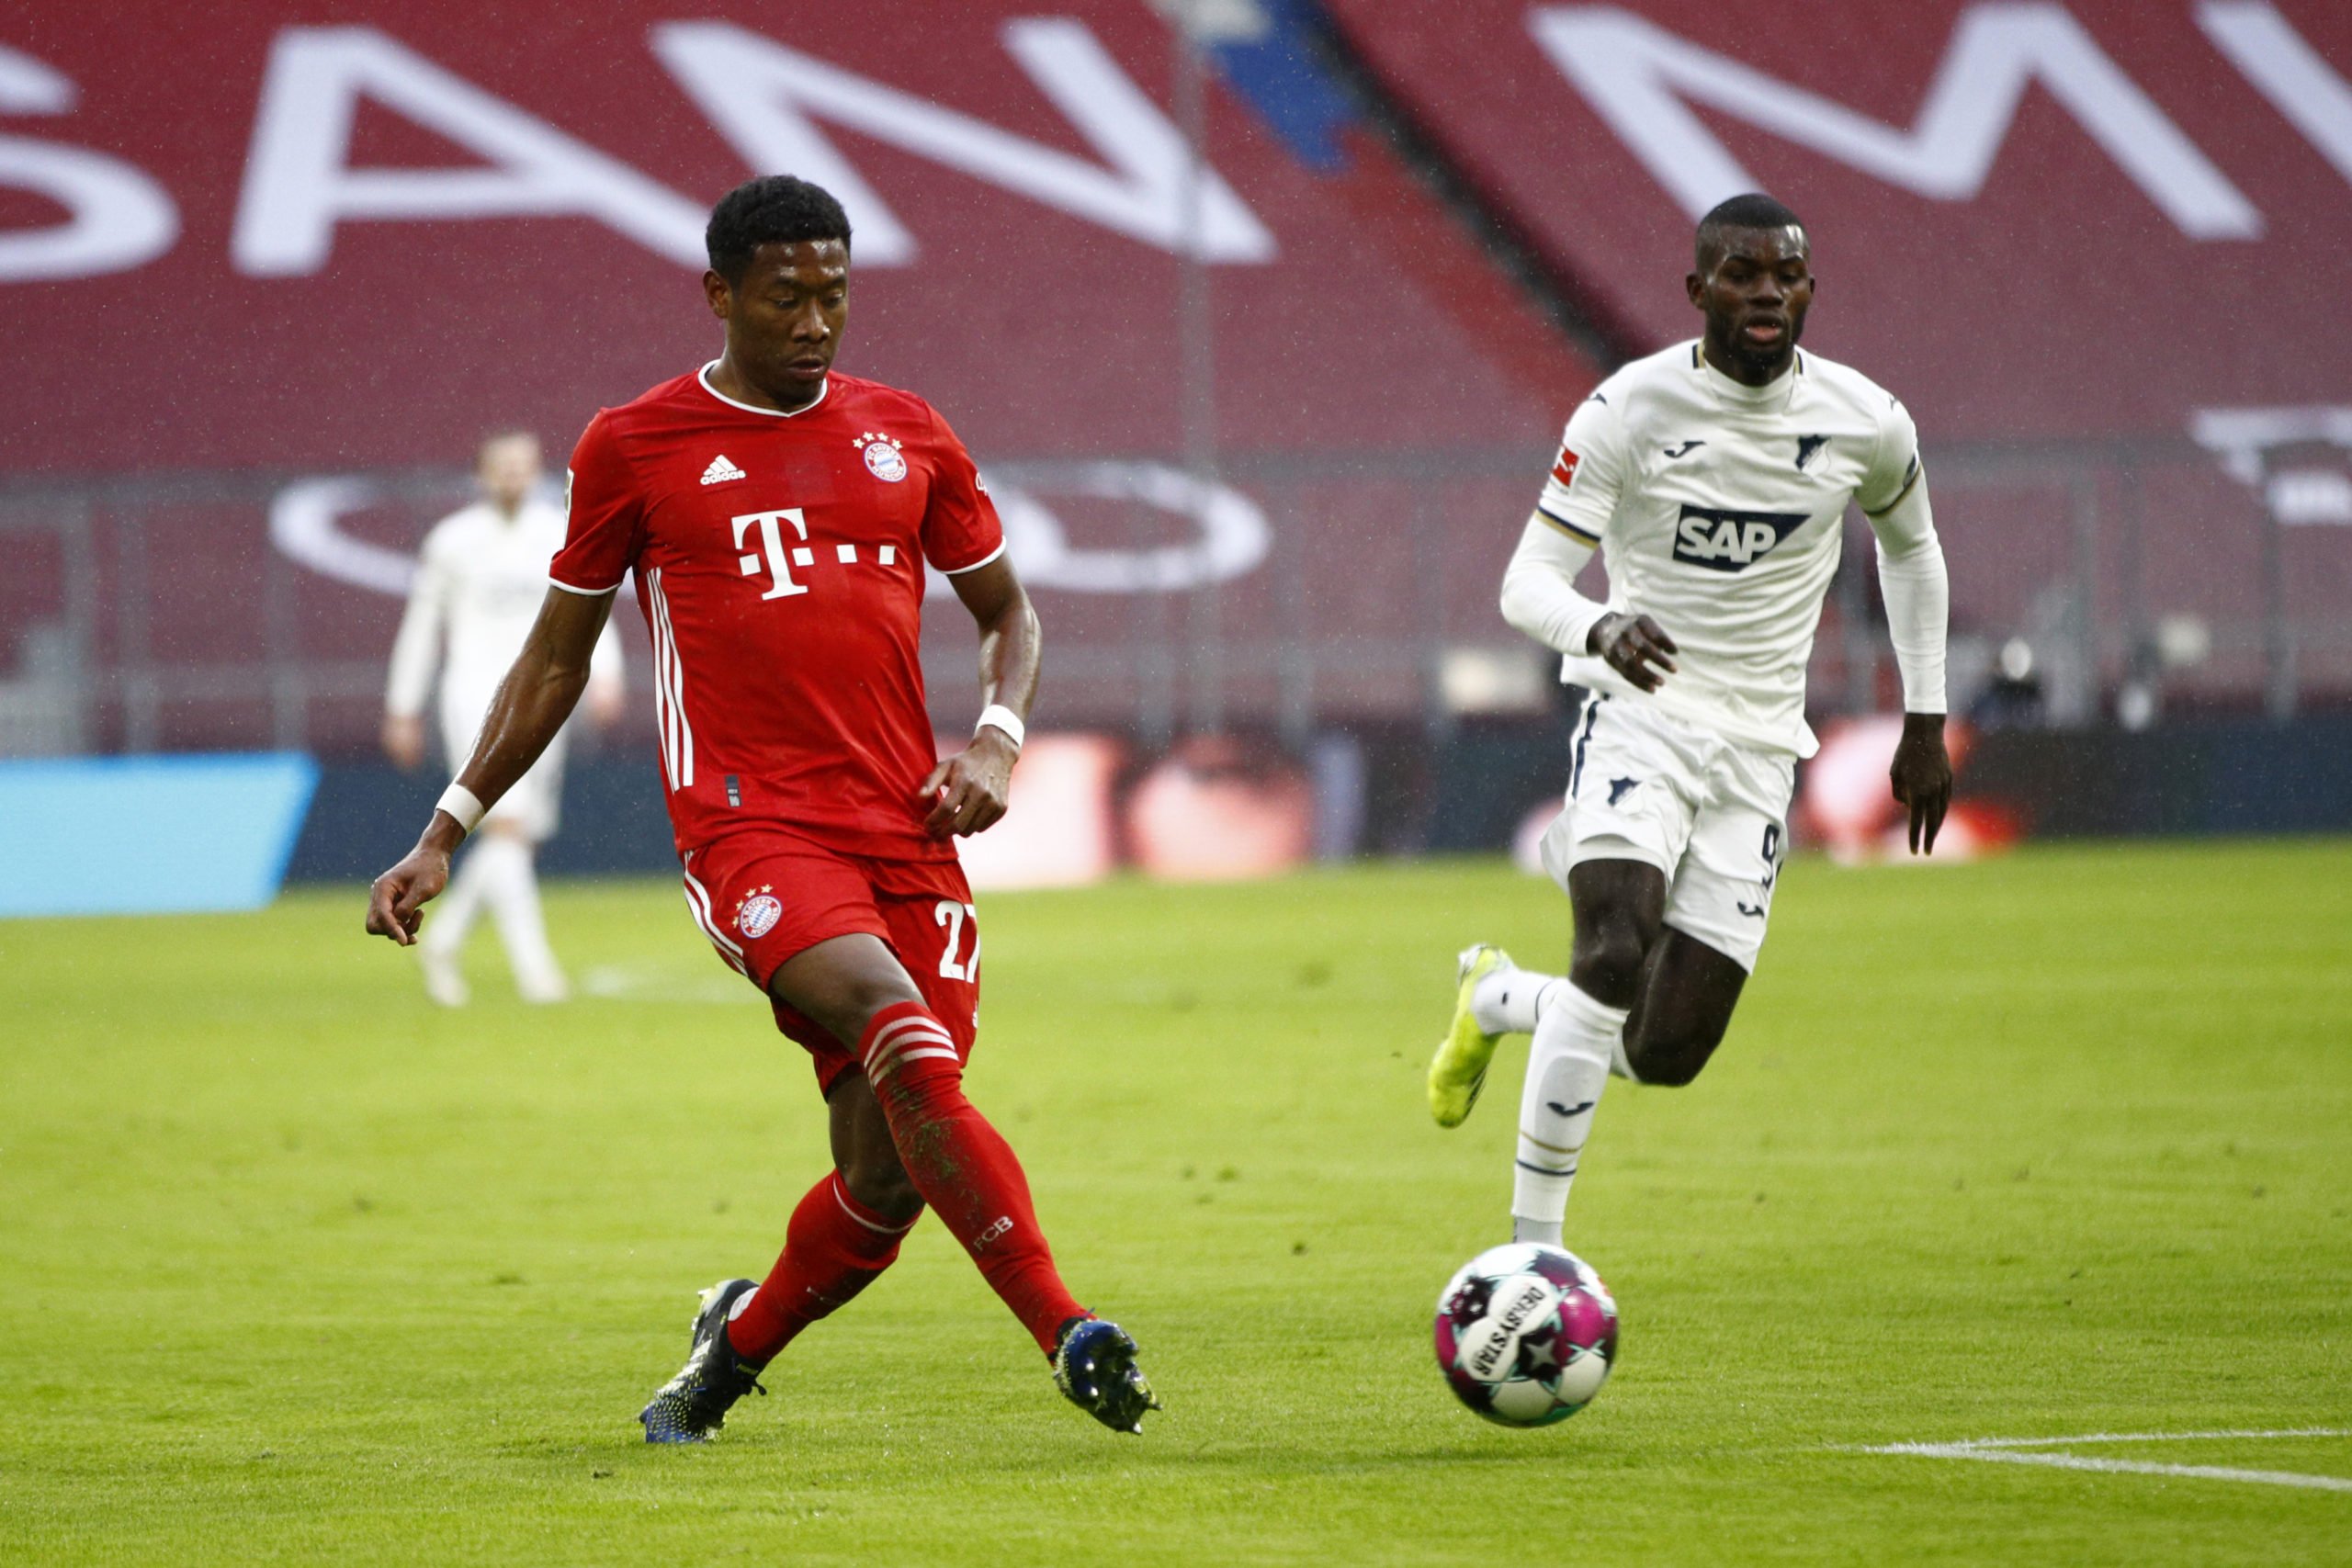 Liverpool facing a losing battle to land David Alaba who is seen in the photo